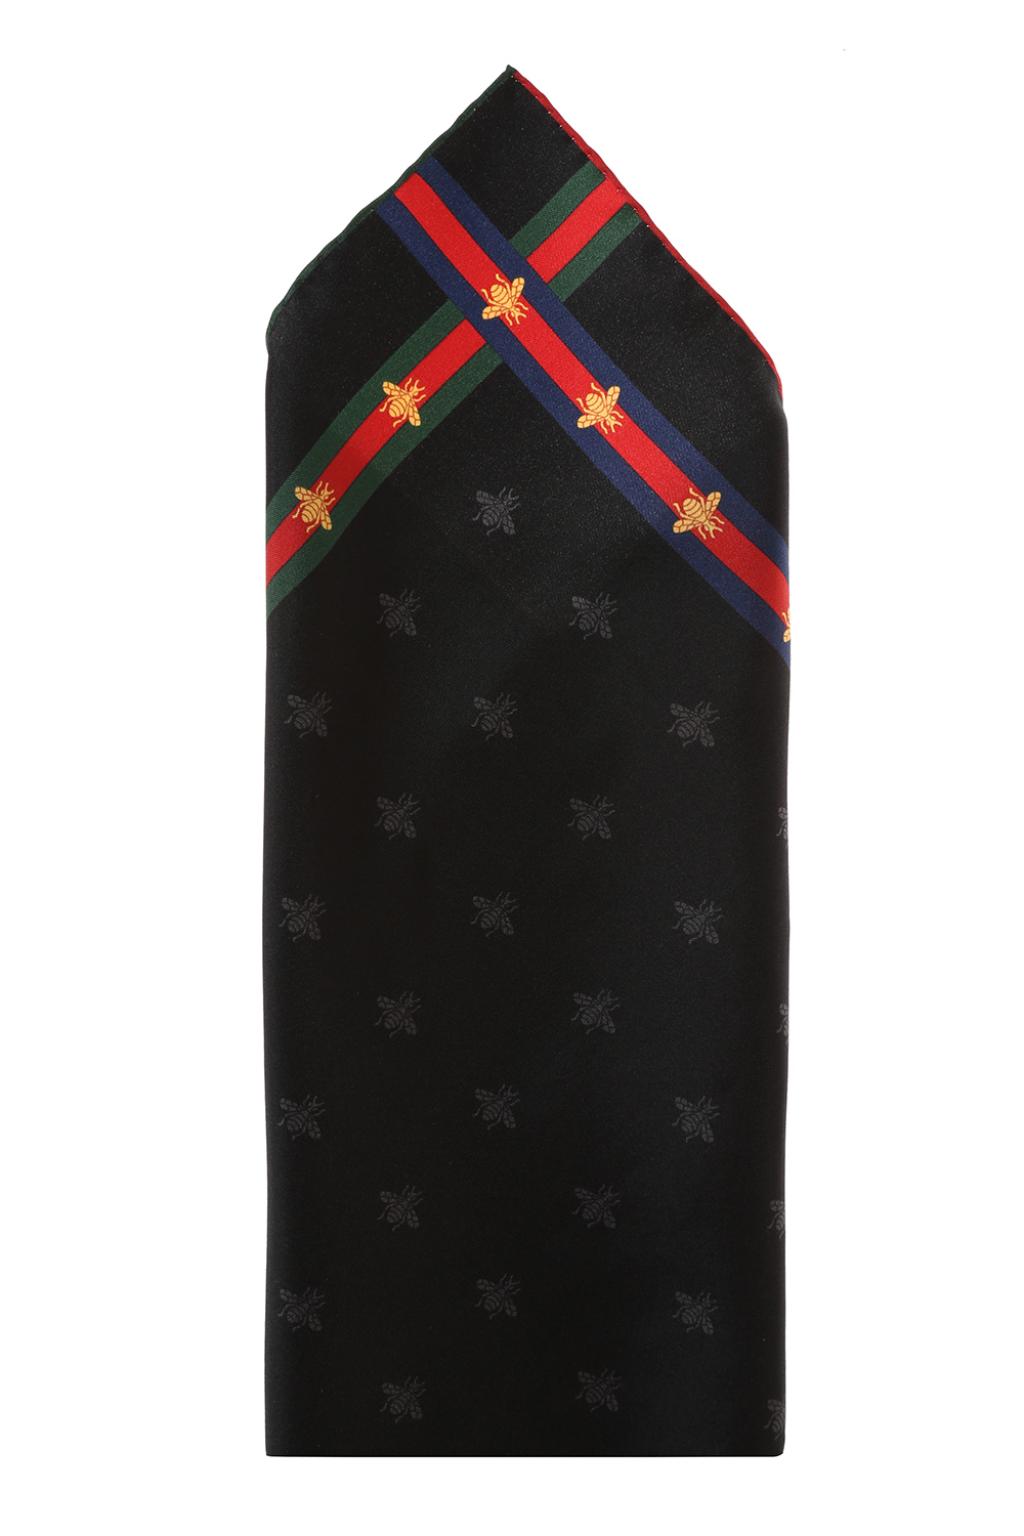 Gucci Bees Pattern Pocket Square in Black for Men